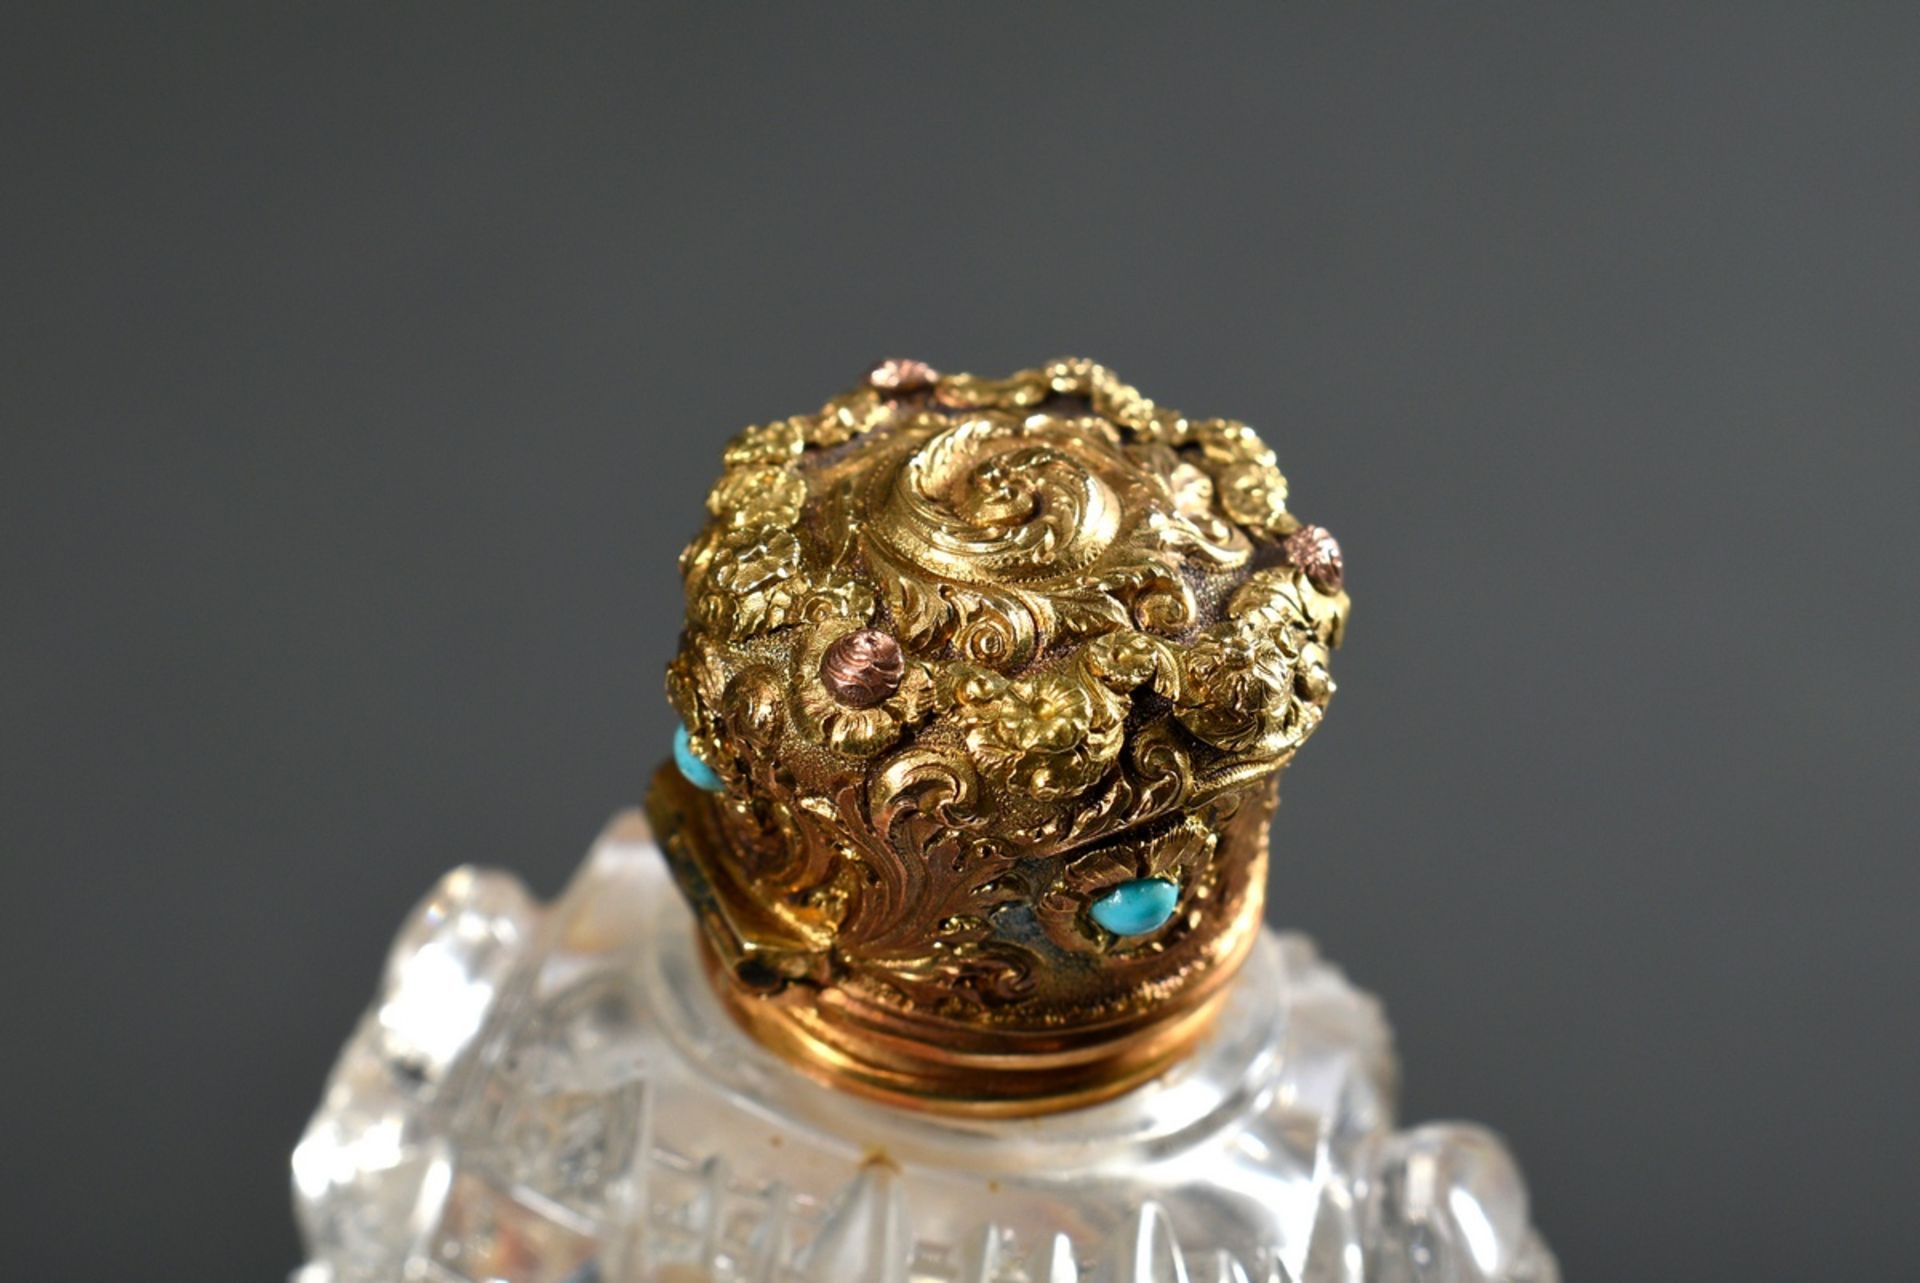 Opulent crystal flacon with floral relief yellow gold 585 lid, turquoise cabochons and rich stone c - Image 4 of 7